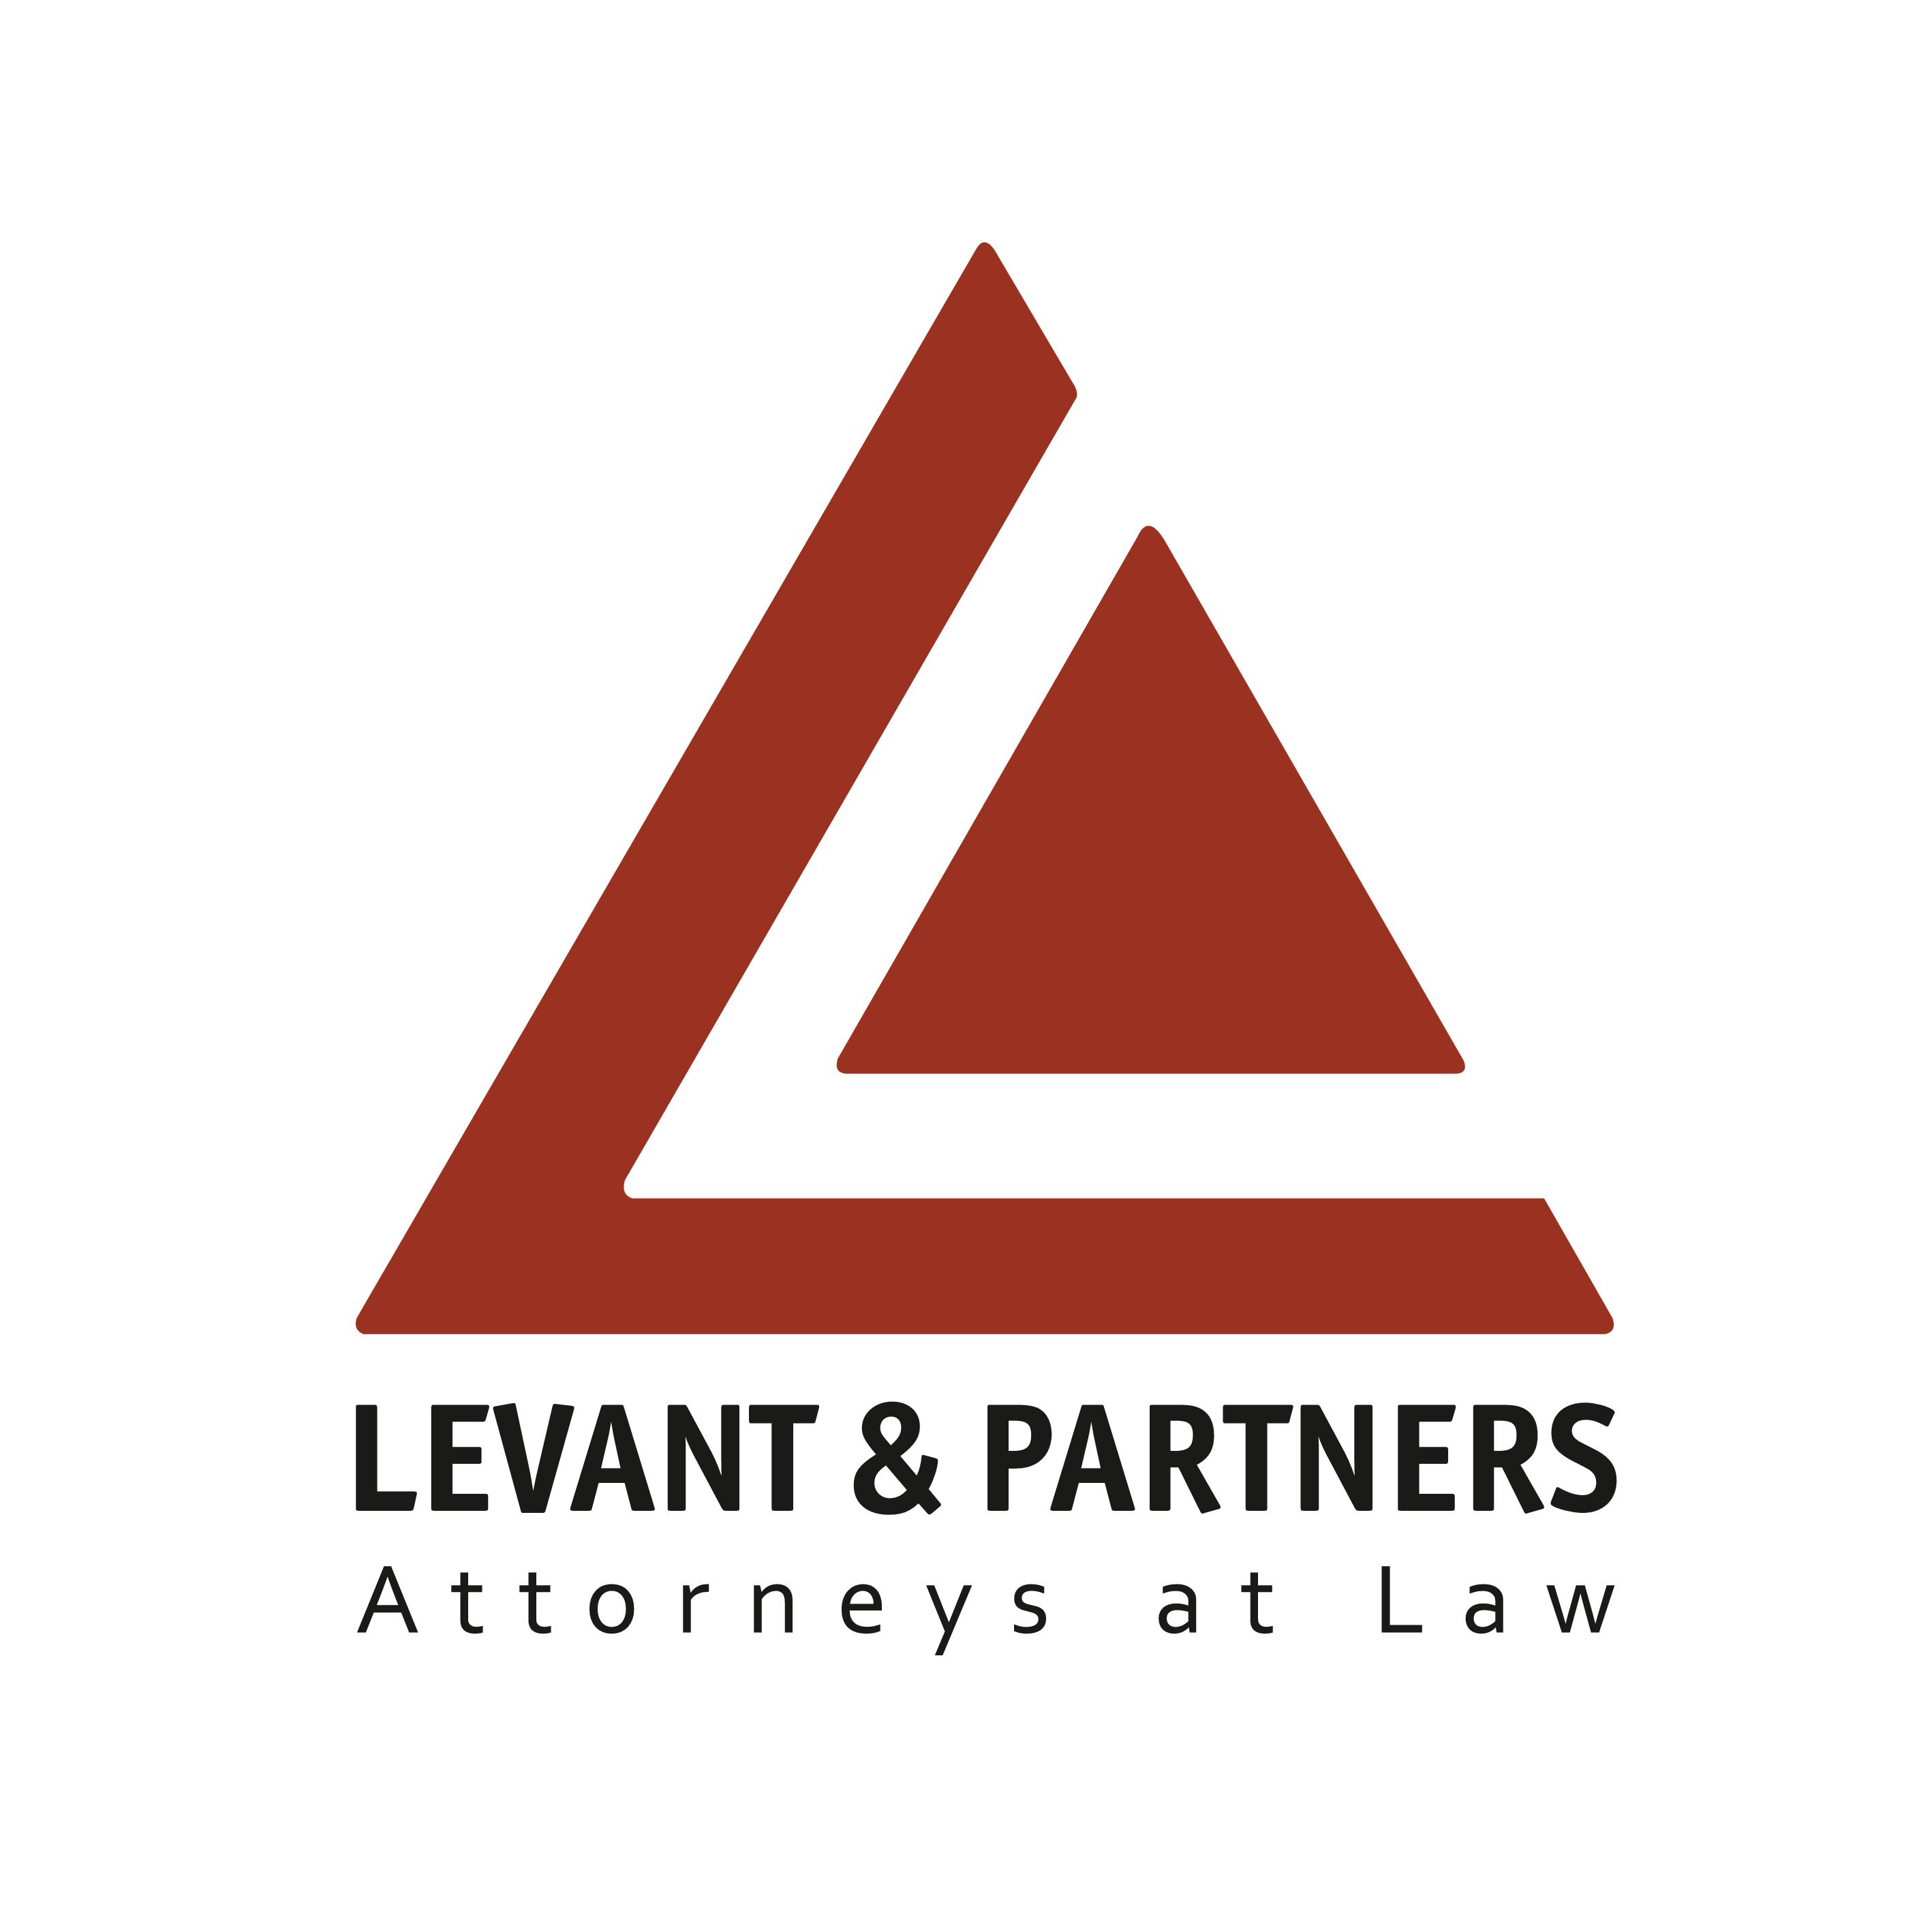 Levant & Partners Law Firm